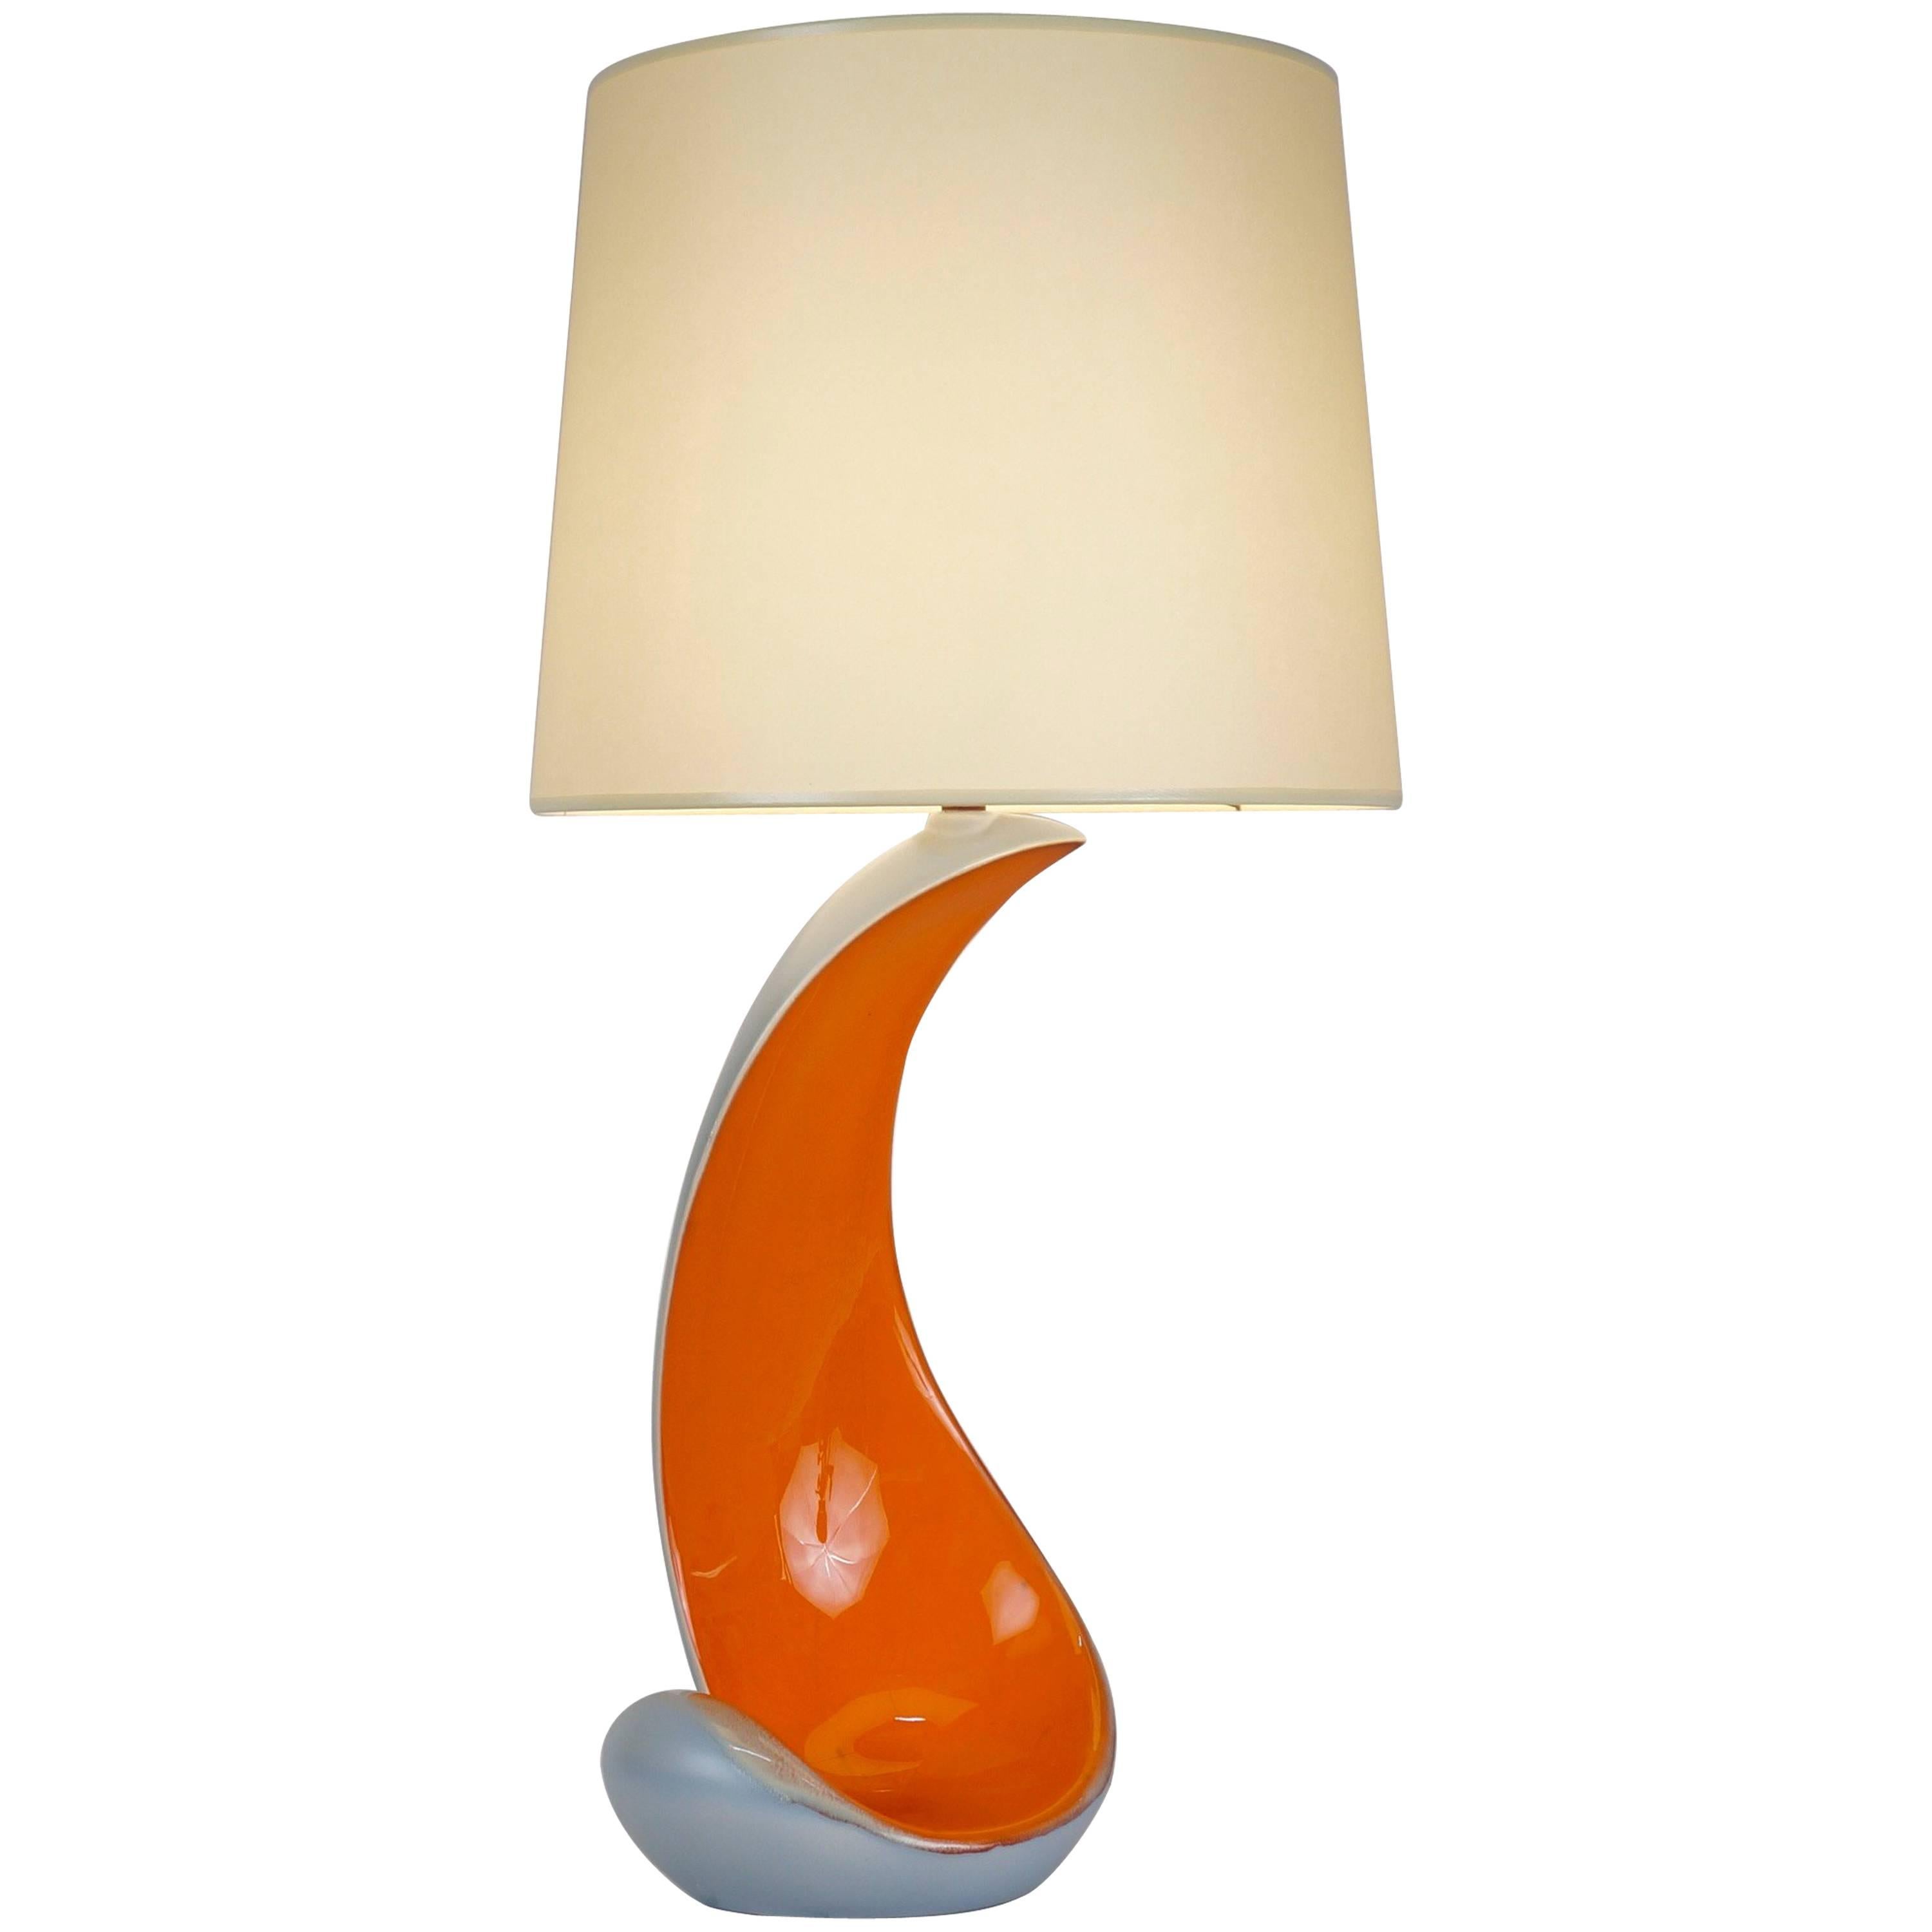 1970 Two-Toned Ceramic Table Lamp